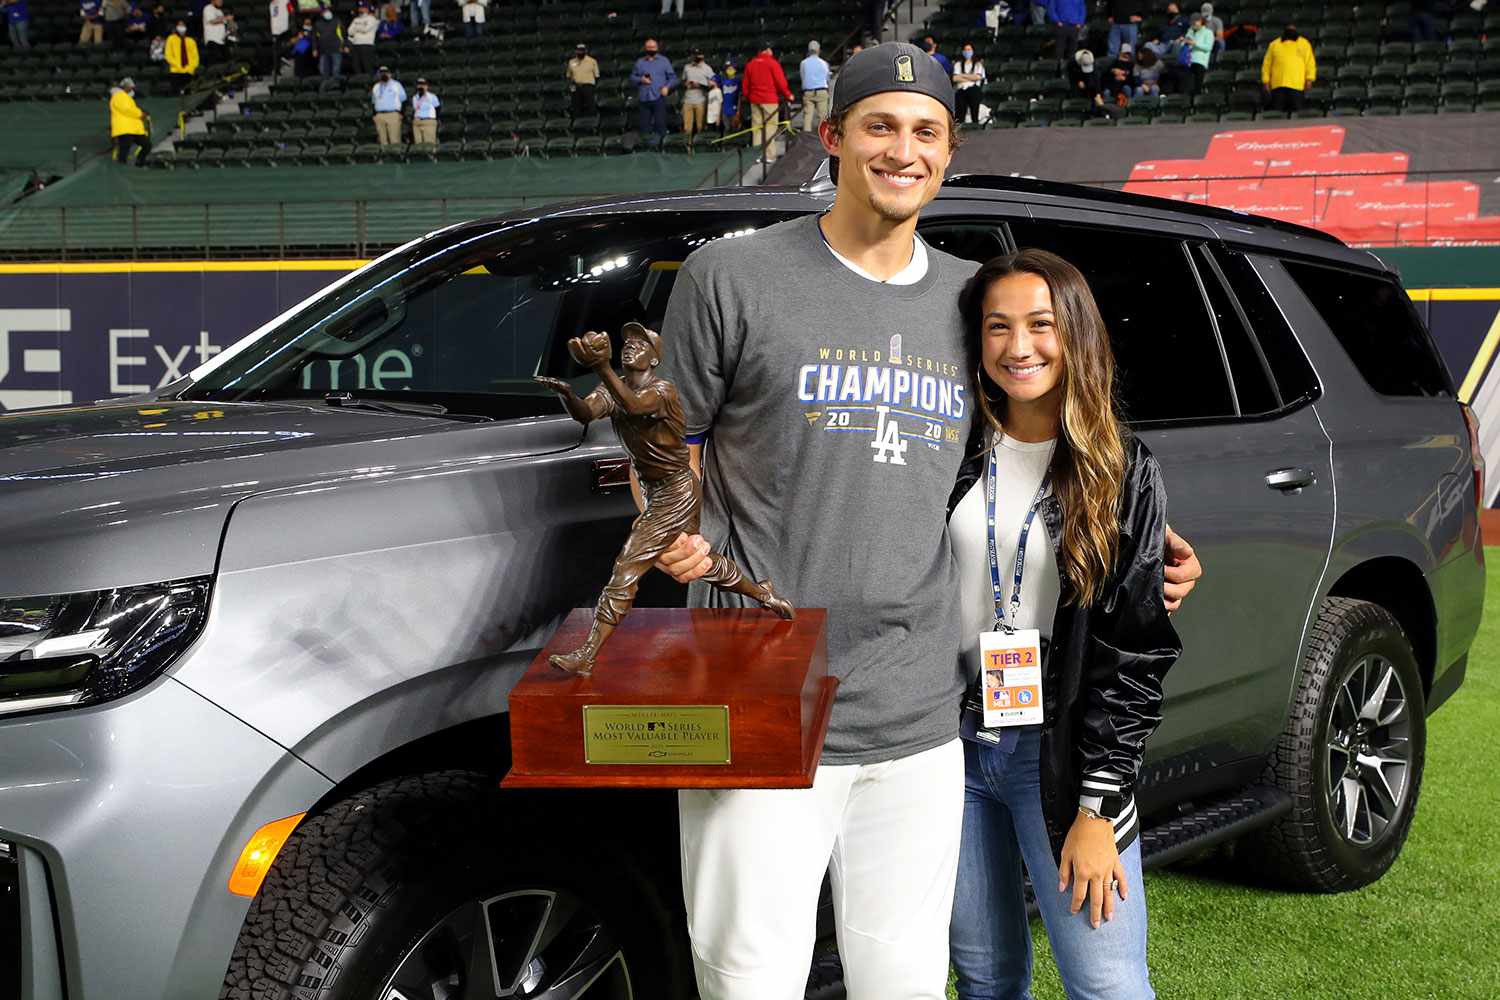 2020 Willie Mays World Series Most Valuable Player Corey Seager #5 of the Los Angeles Dodgers poses for a photo with his girlfriend Madisyn Van Ham after the Dodgers defeated the Tampa Bay Rays in Game 6 to clinch the 2020 World Series at Globe Life Field on Tuesday, October 27, 2020 in Arlington, Texas